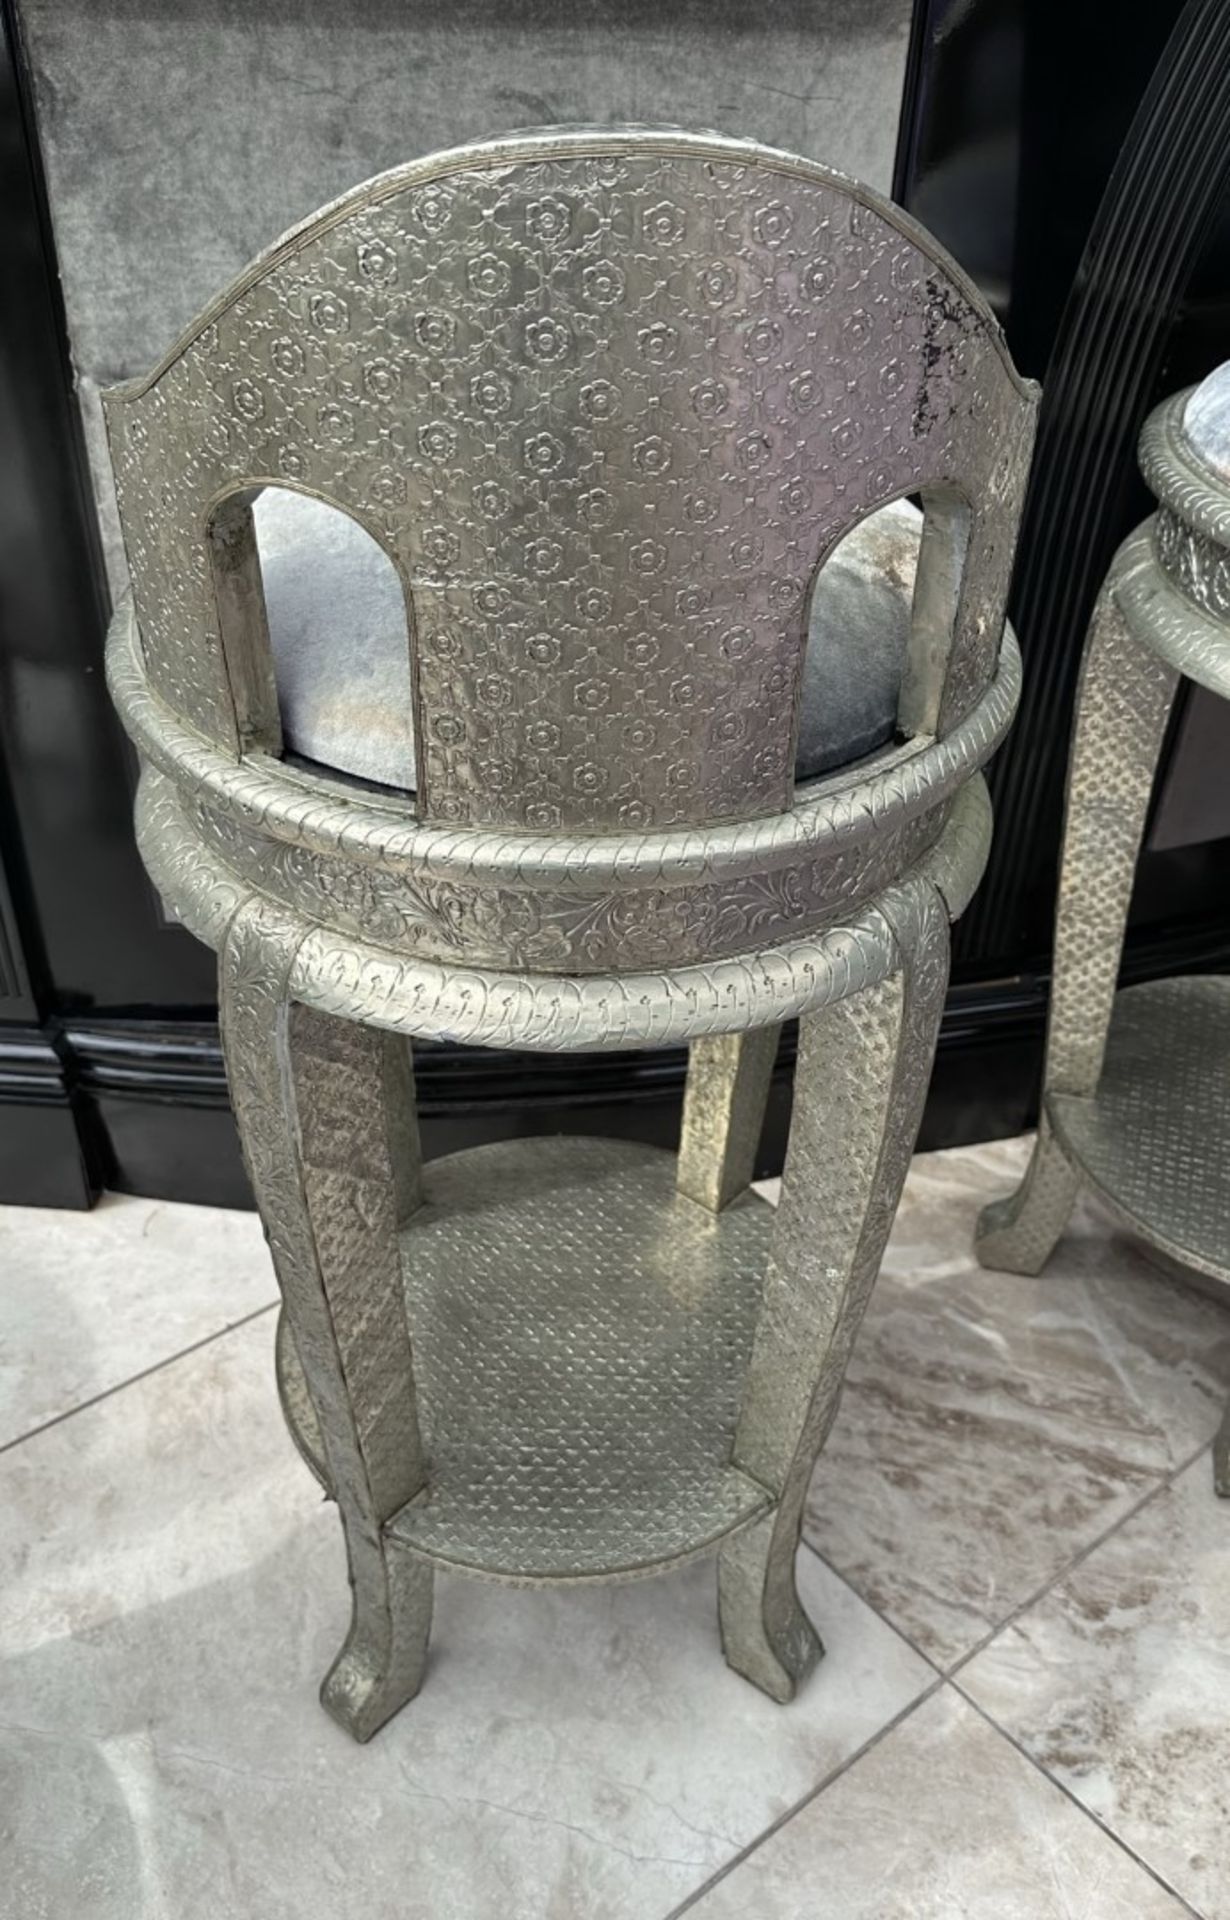 6 x Ornate Silver Tone Bar Stools With Grey Velvet Seat Pads - Image 5 of 16